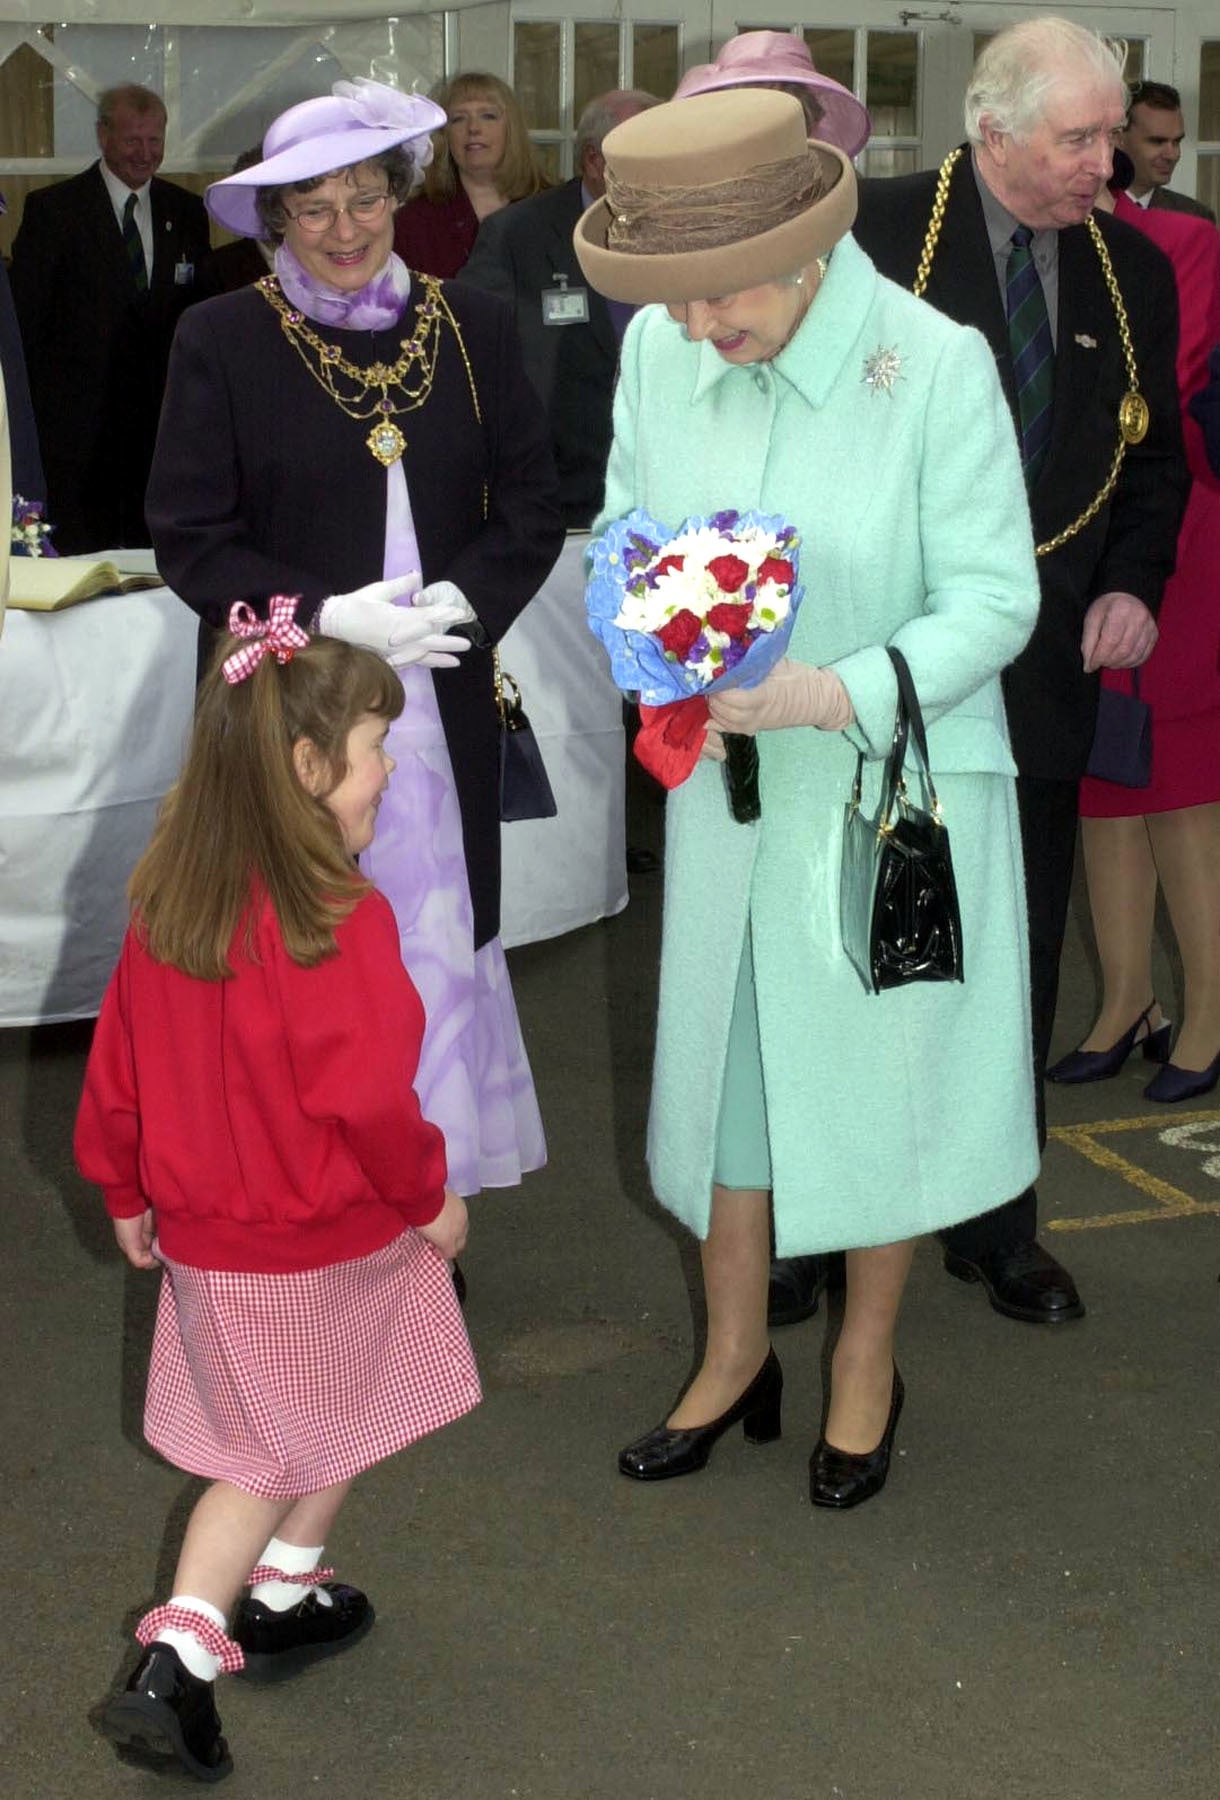 Katie Meehan, photographed with the Queen by PA in 2002, described the moment as ‘hilarious’ (PA)